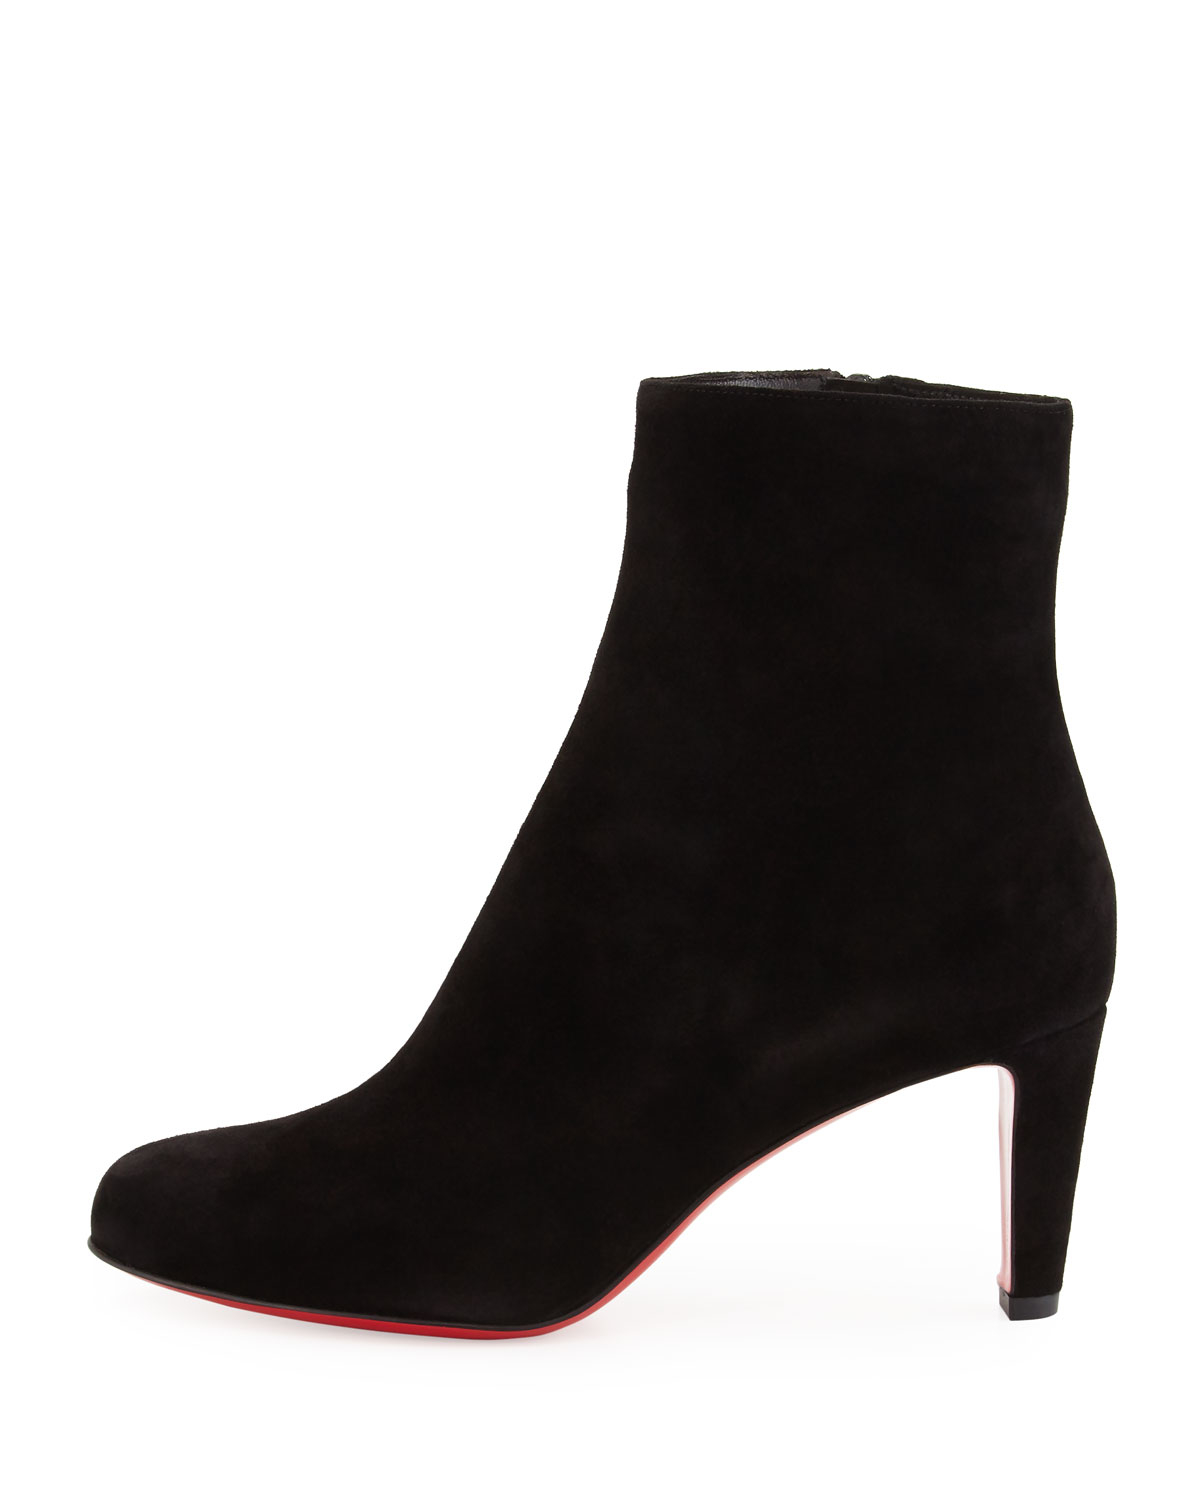 christian louboutin round-toe ankle boots Brown suede - Bbridges